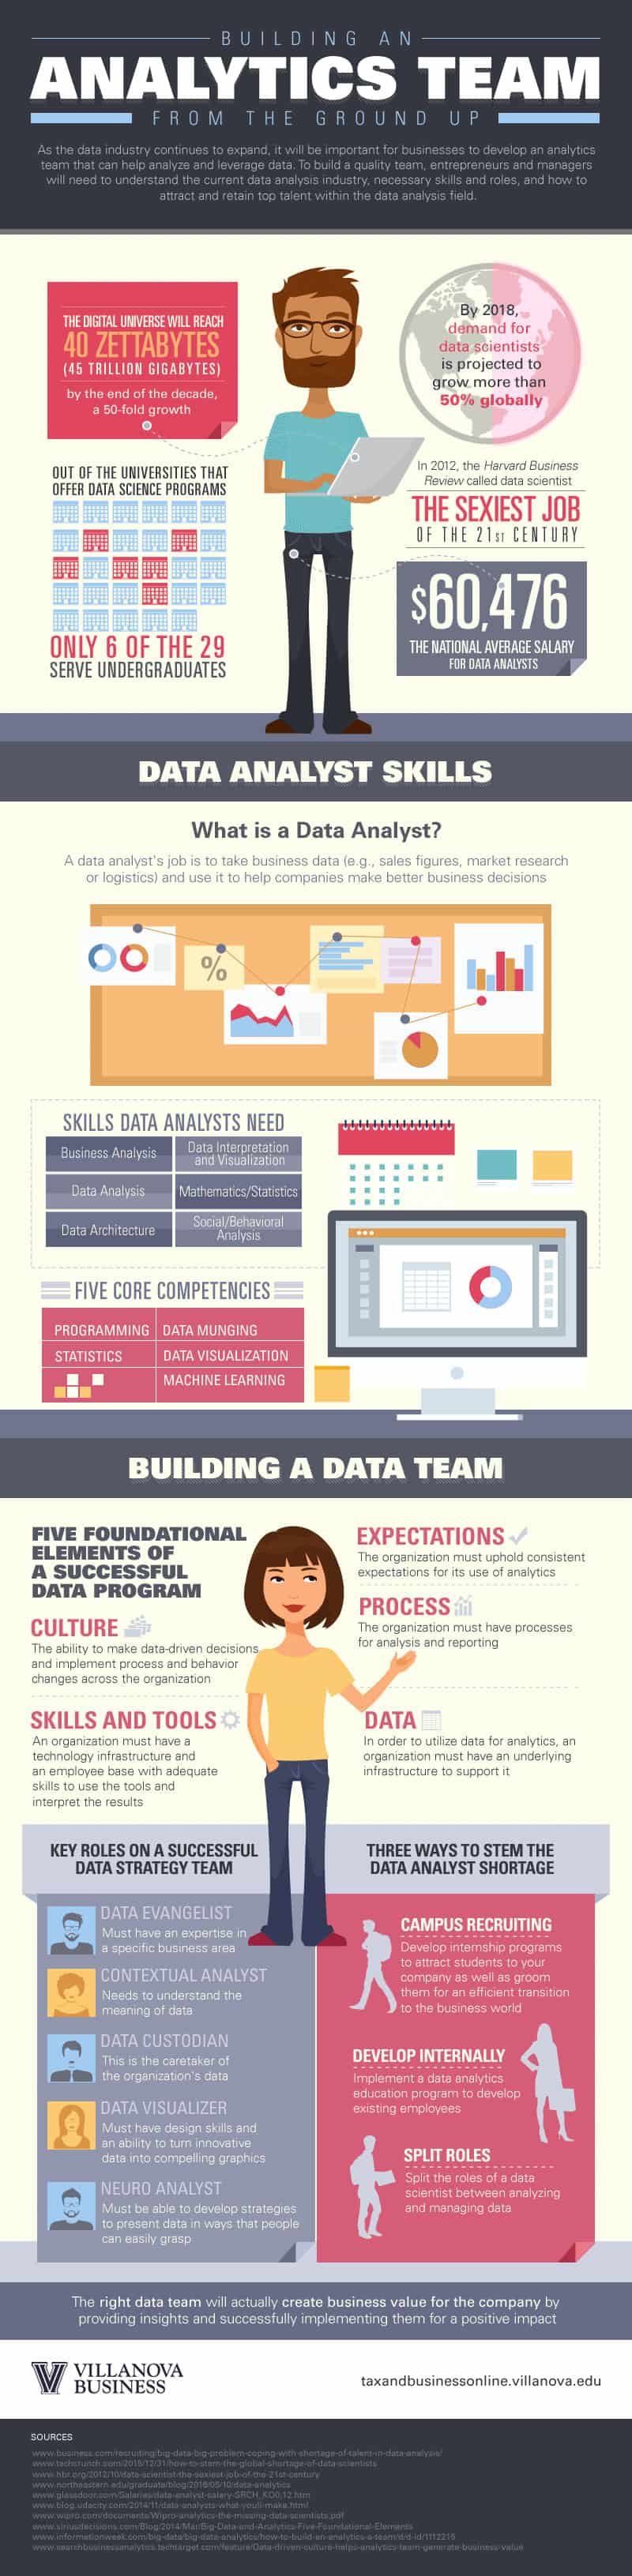 Tips for building an analytics team in an infographic